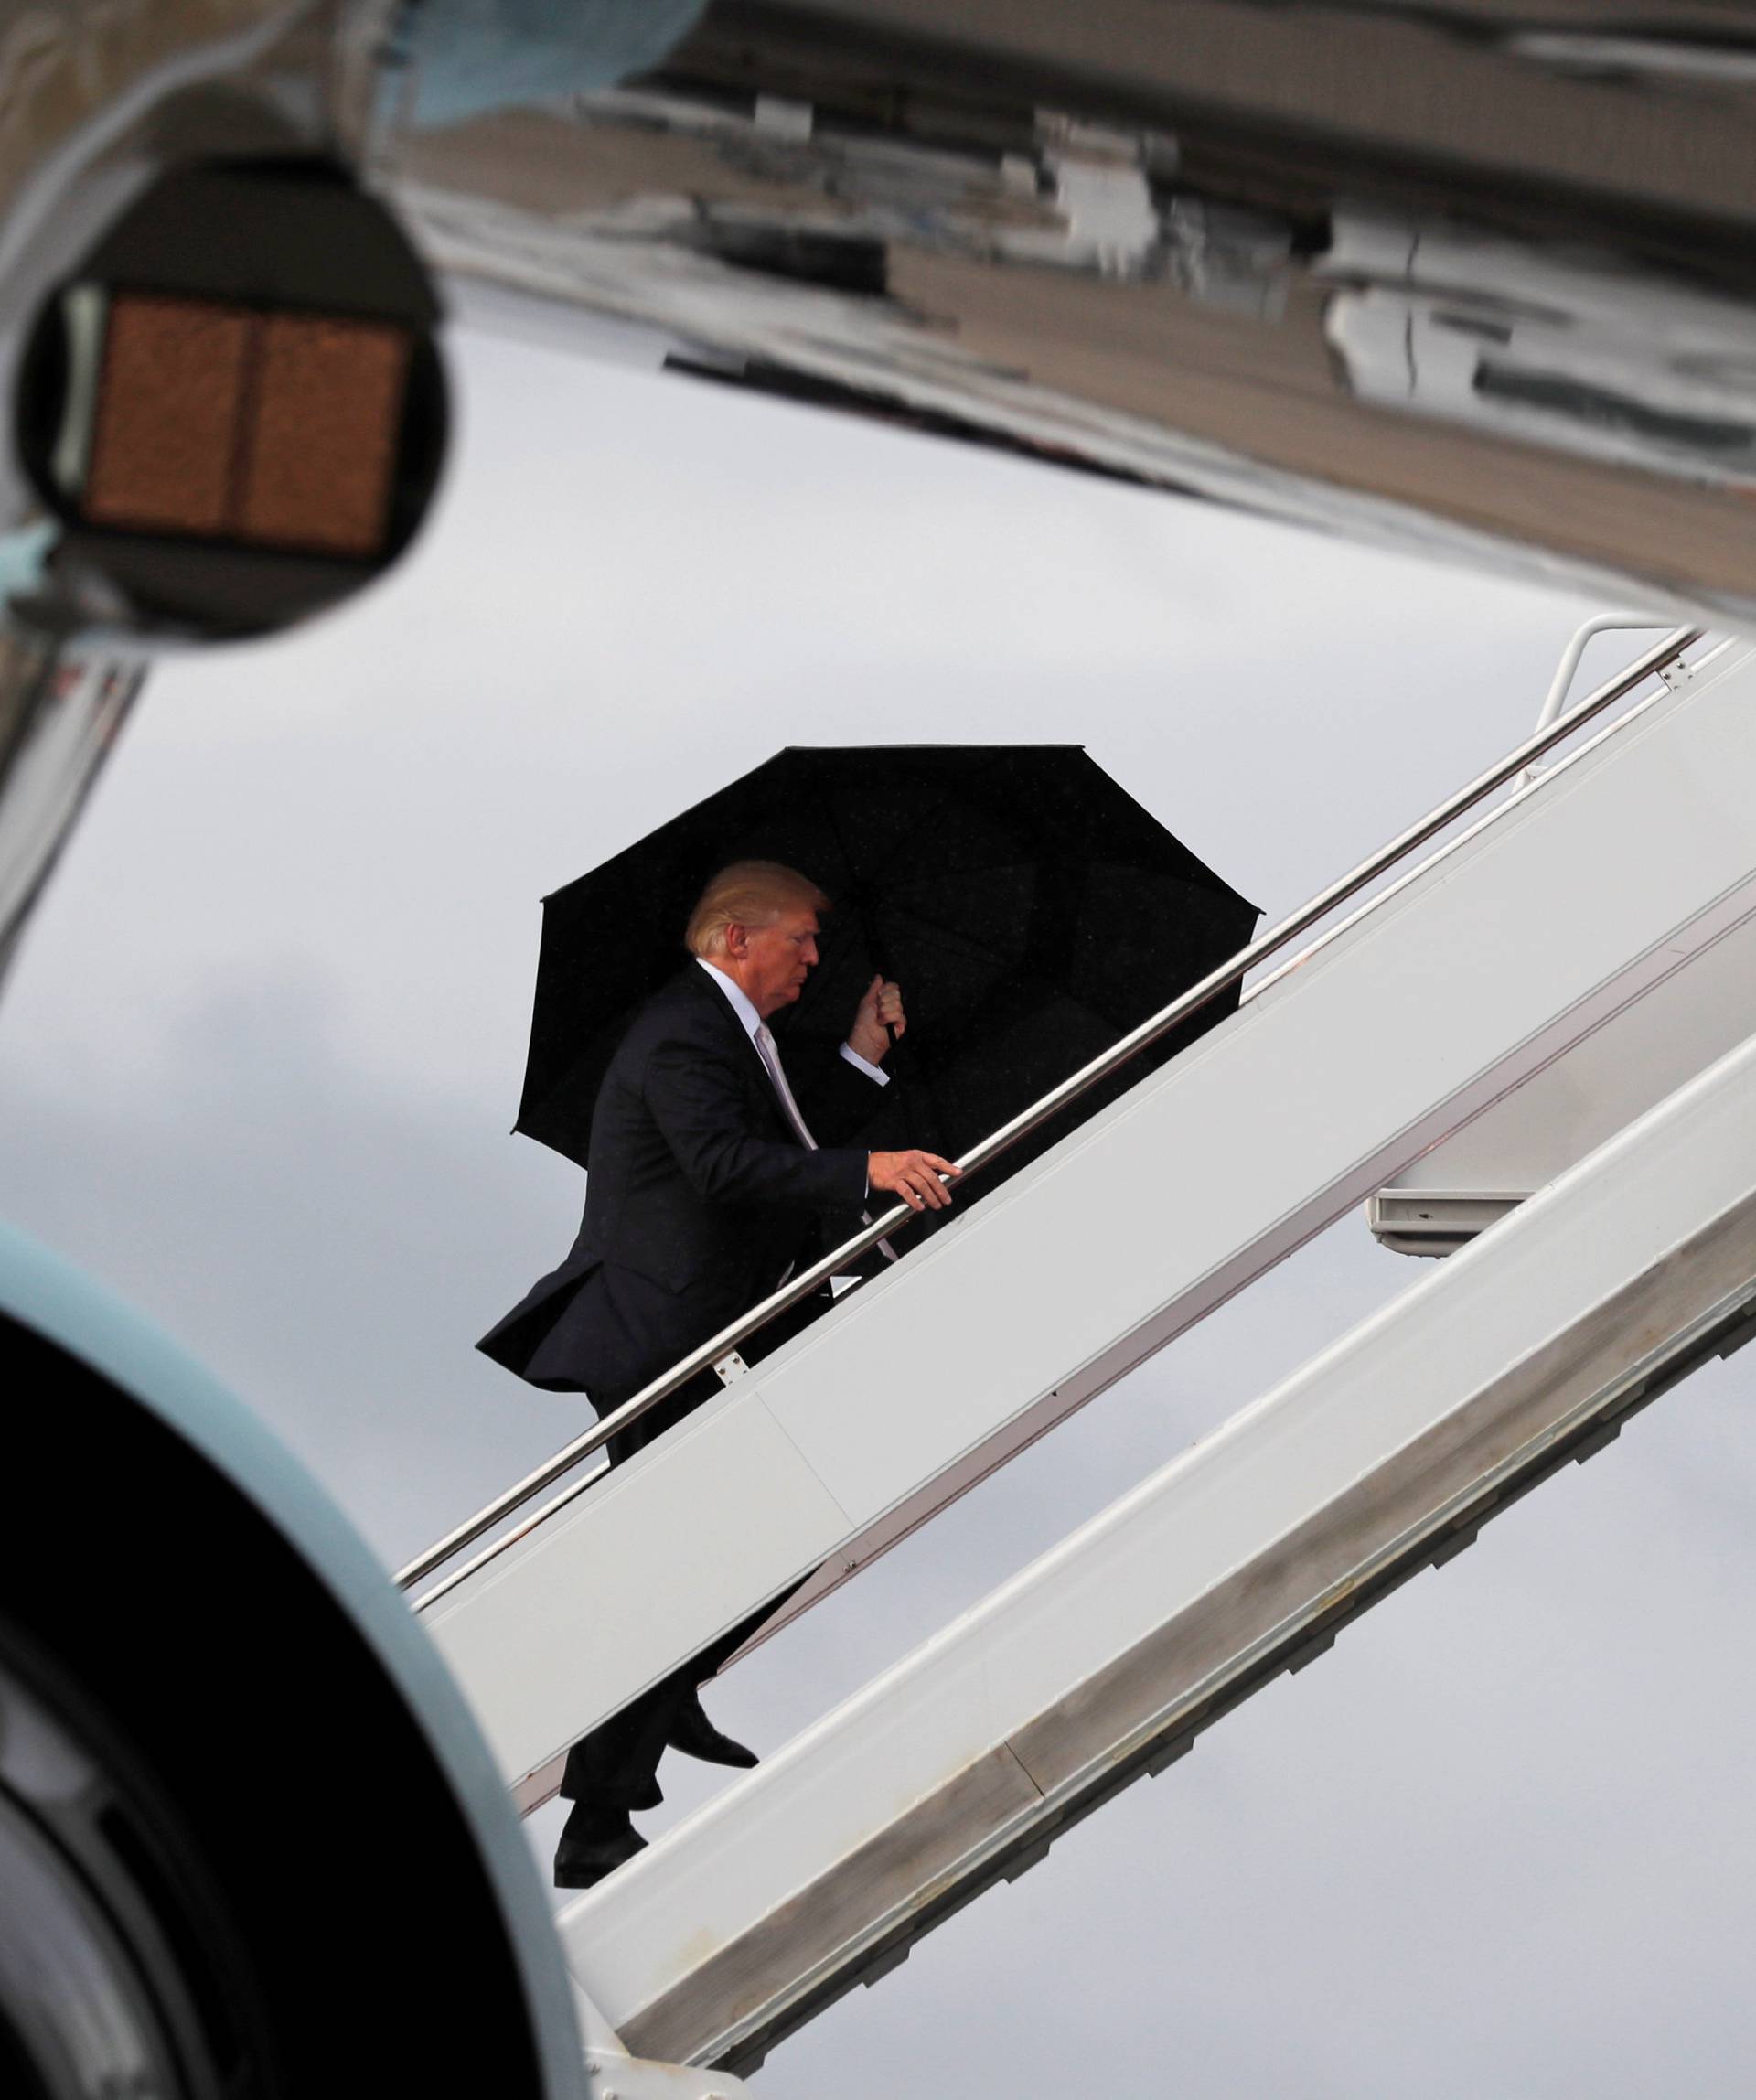 U.S. President Donald Trump boards Air Force One as he departs West Palm Beach, Florida